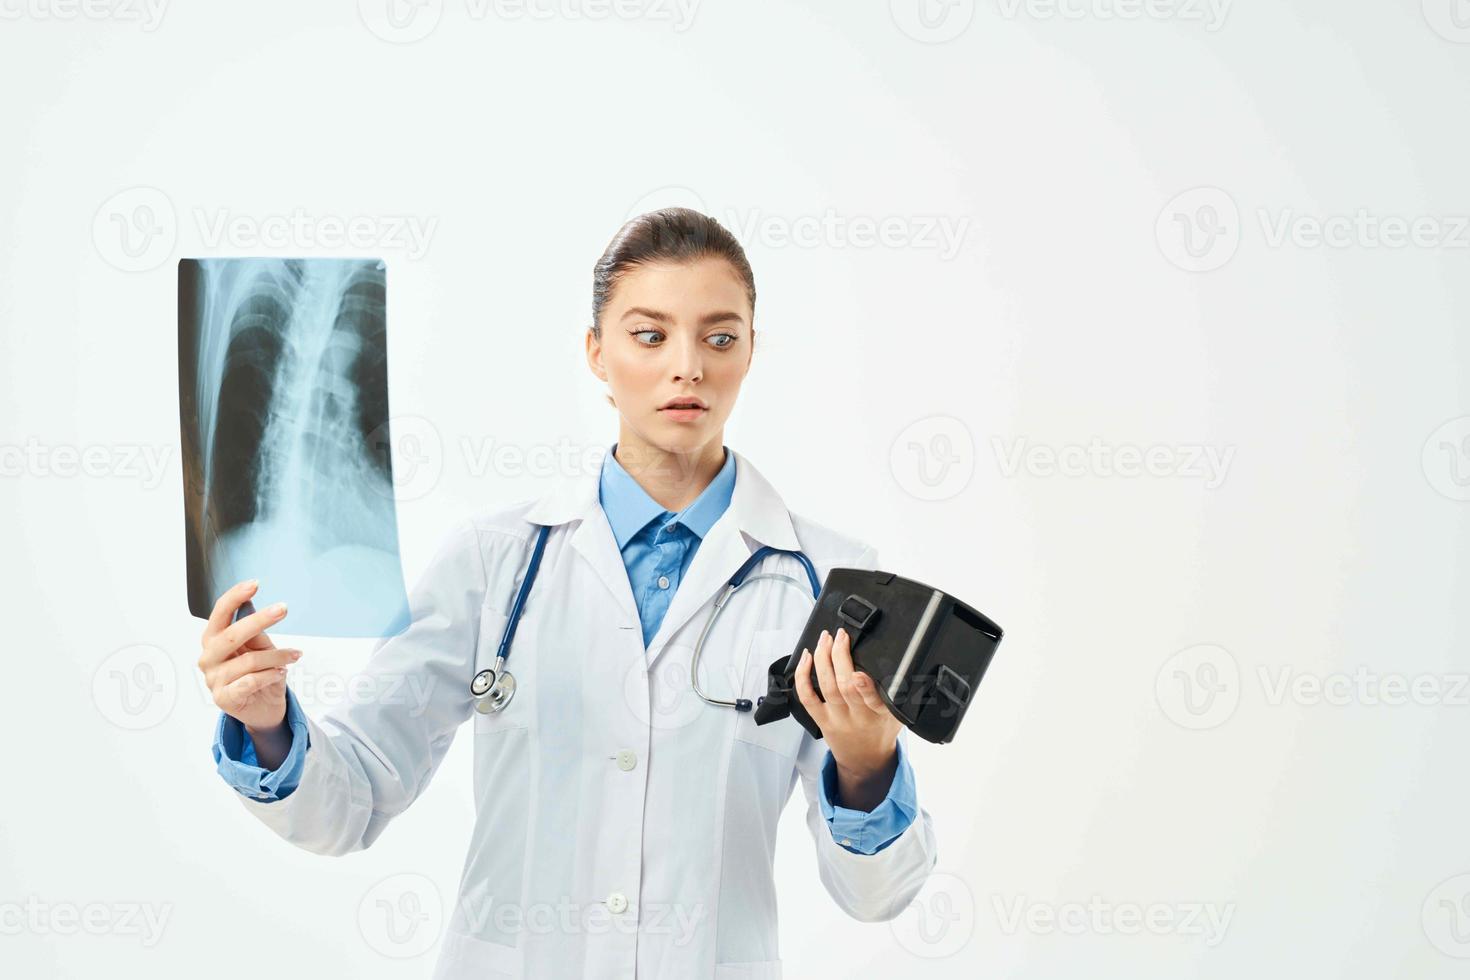 woman doctor hospital white coat research health radiologist photo